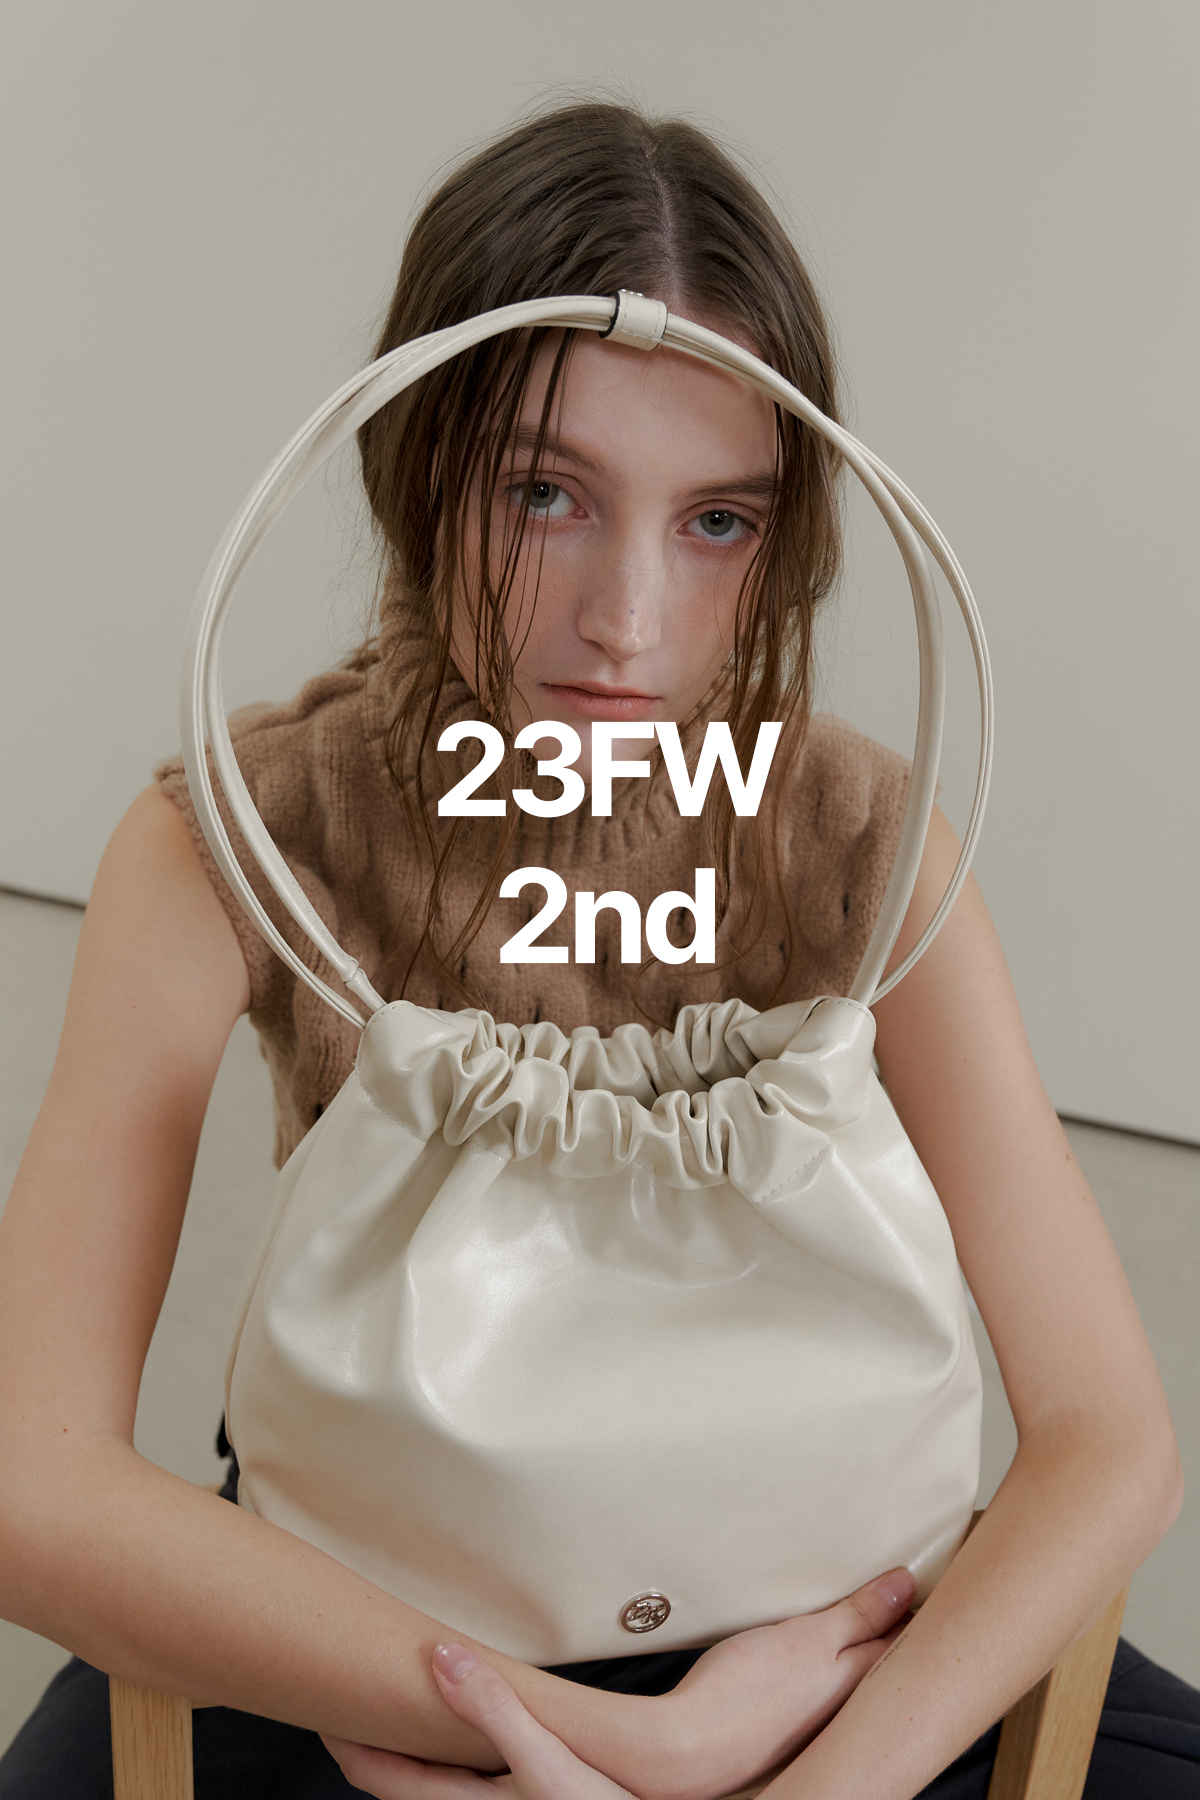 23FW 2nd